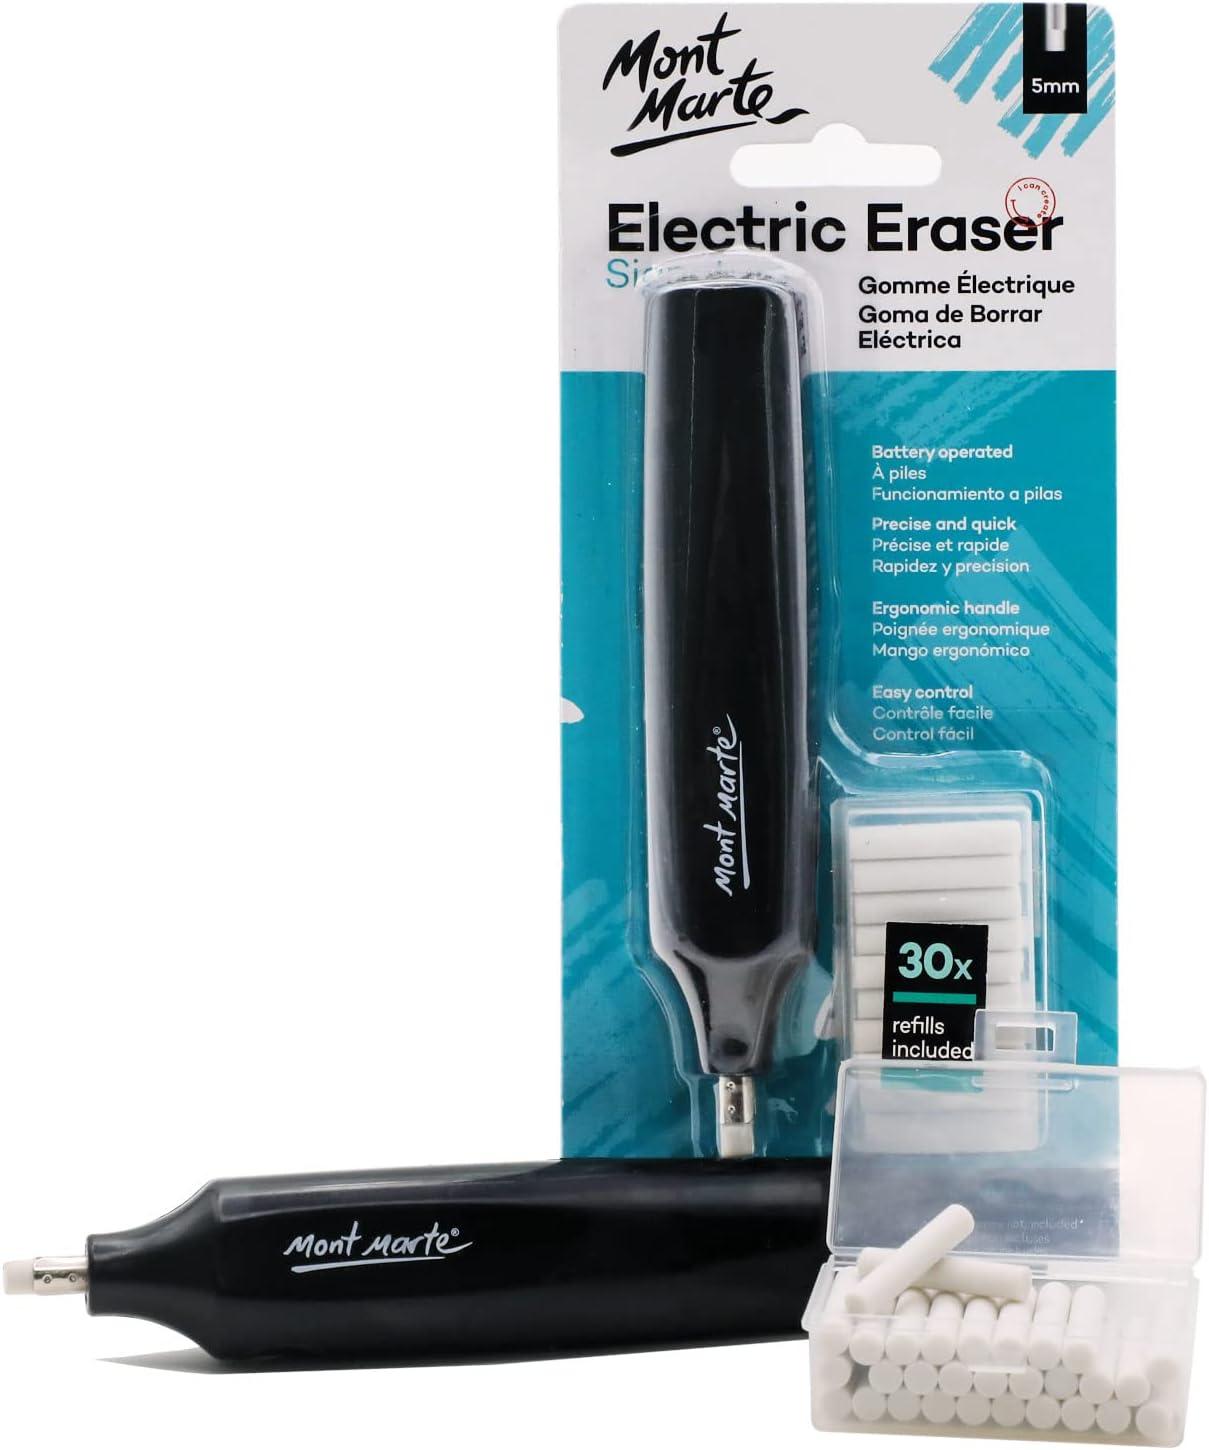 mont marte electric eraser kit includes 30 eraser refills suitable for use with graphite pencils and color